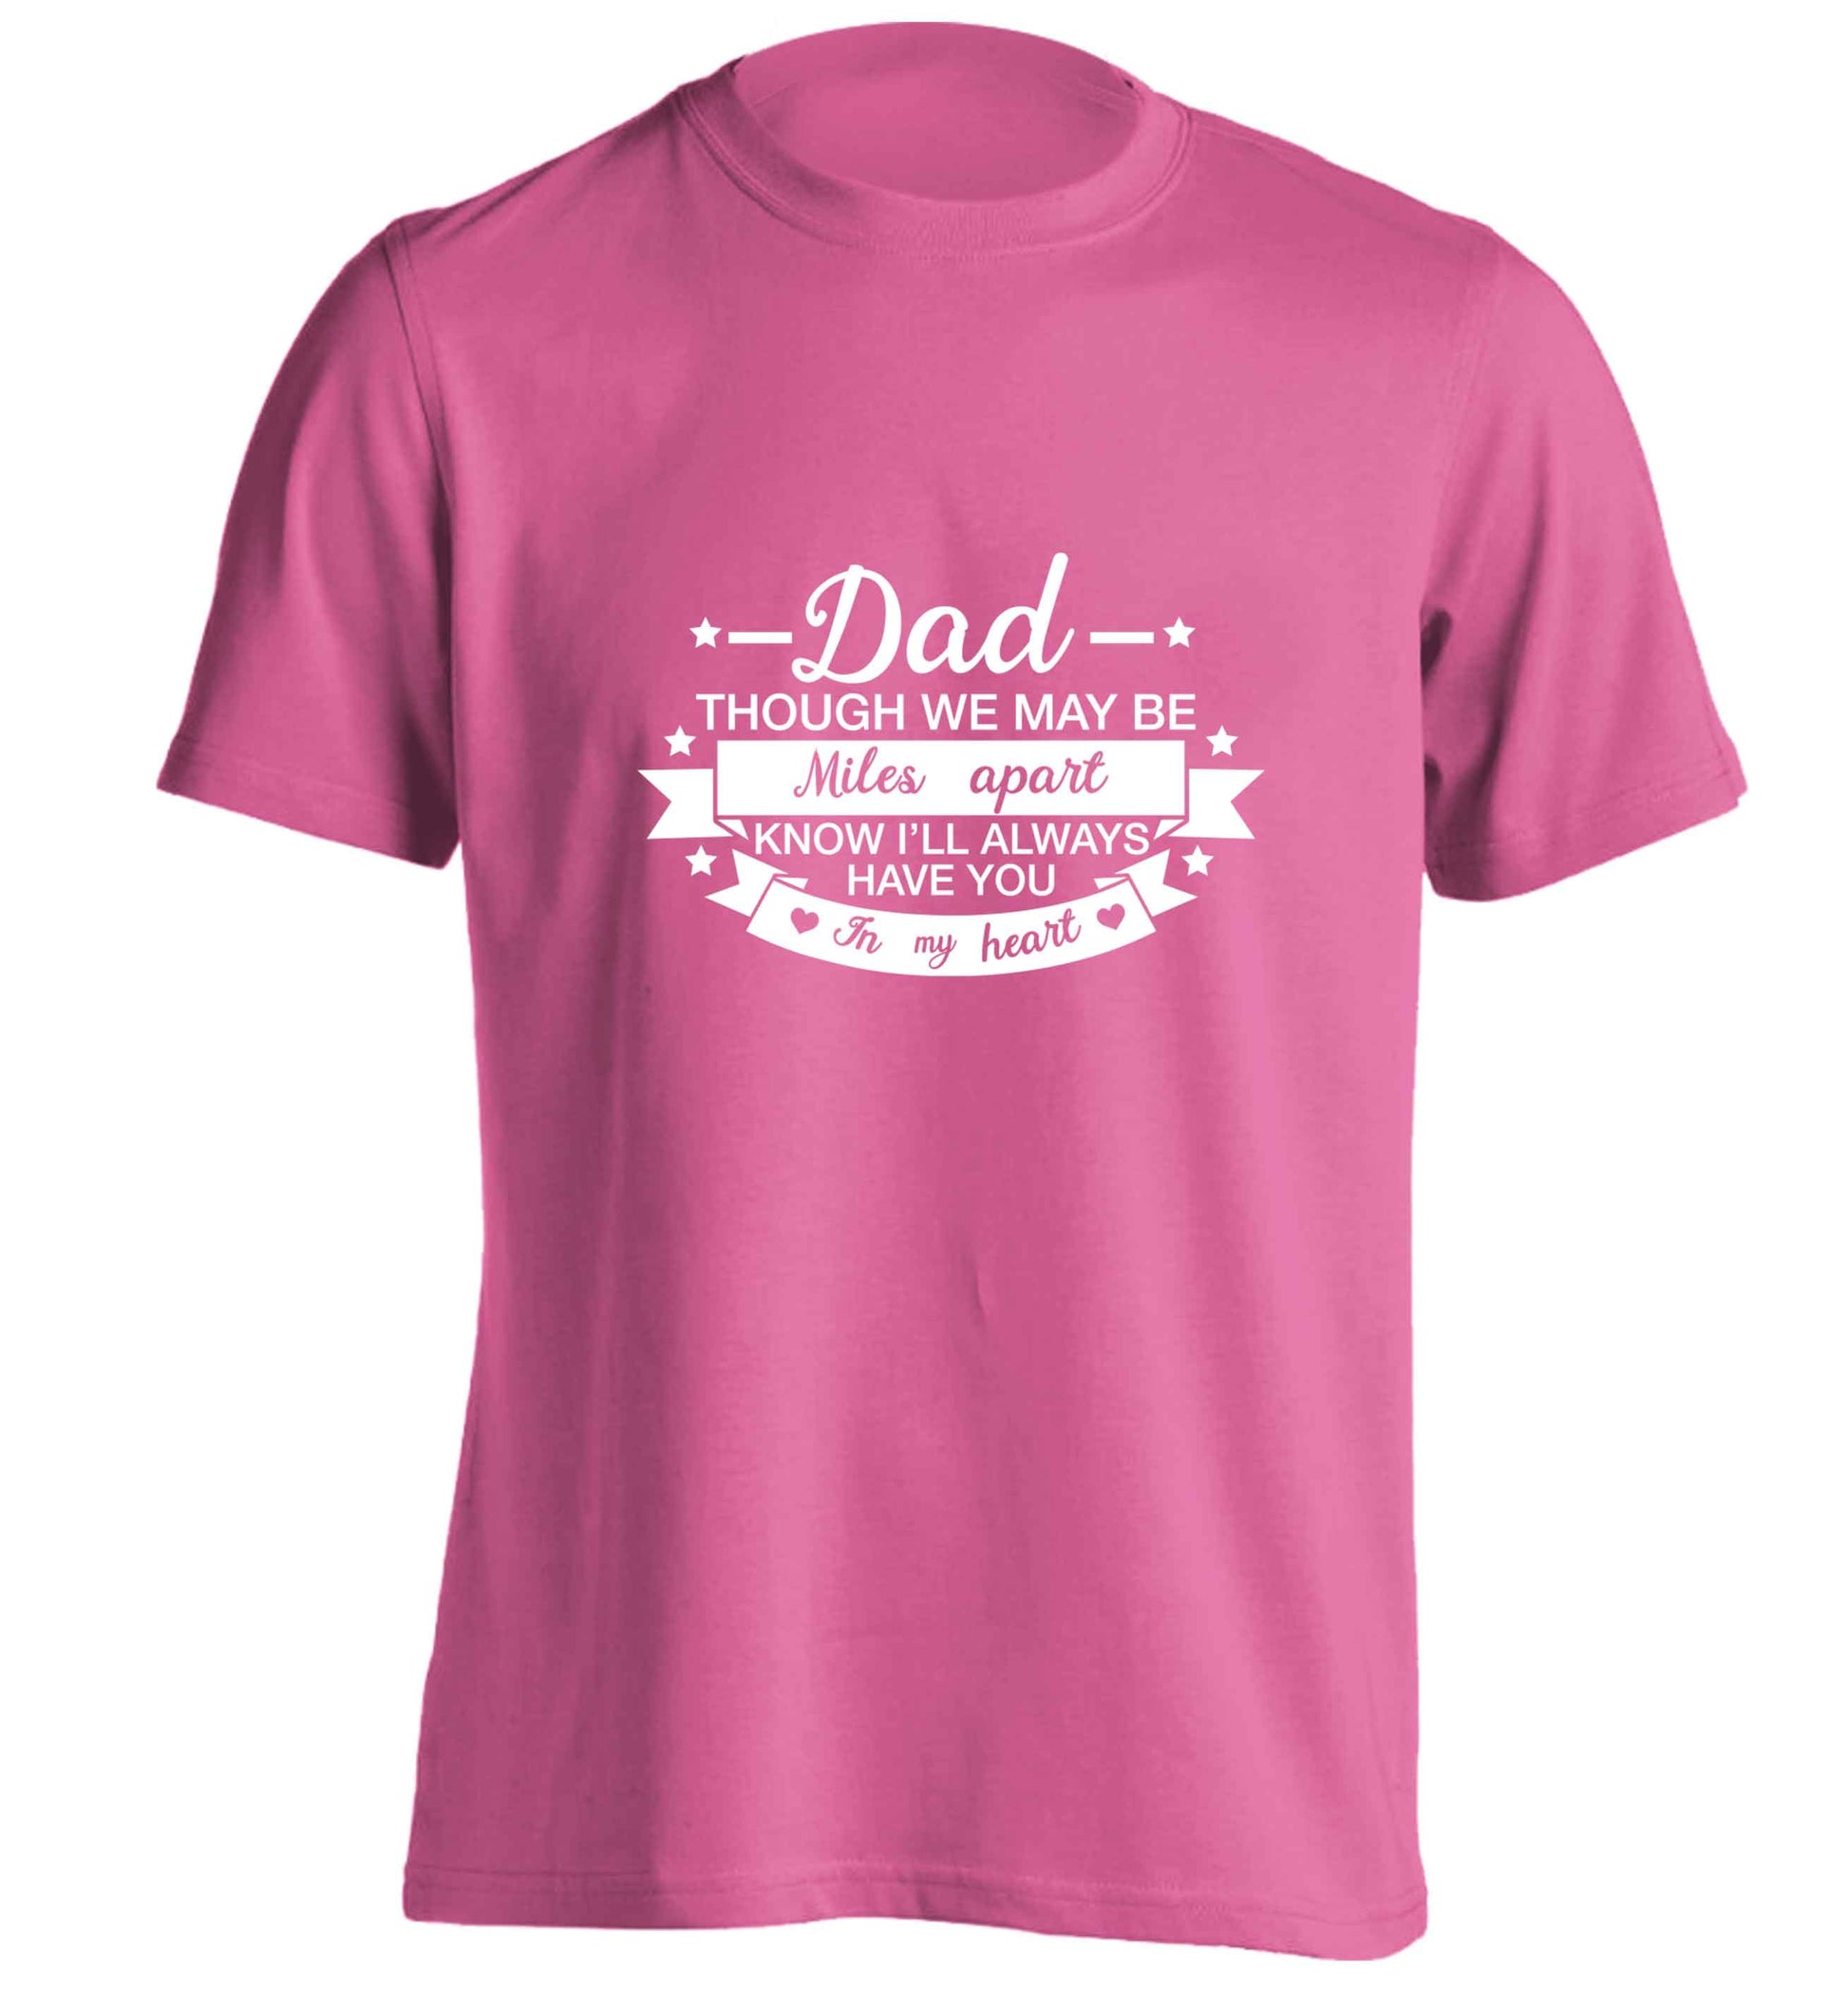 Dad though we are miles apart know I'll always have you in my heart adults unisex pink Tshirt 2XL